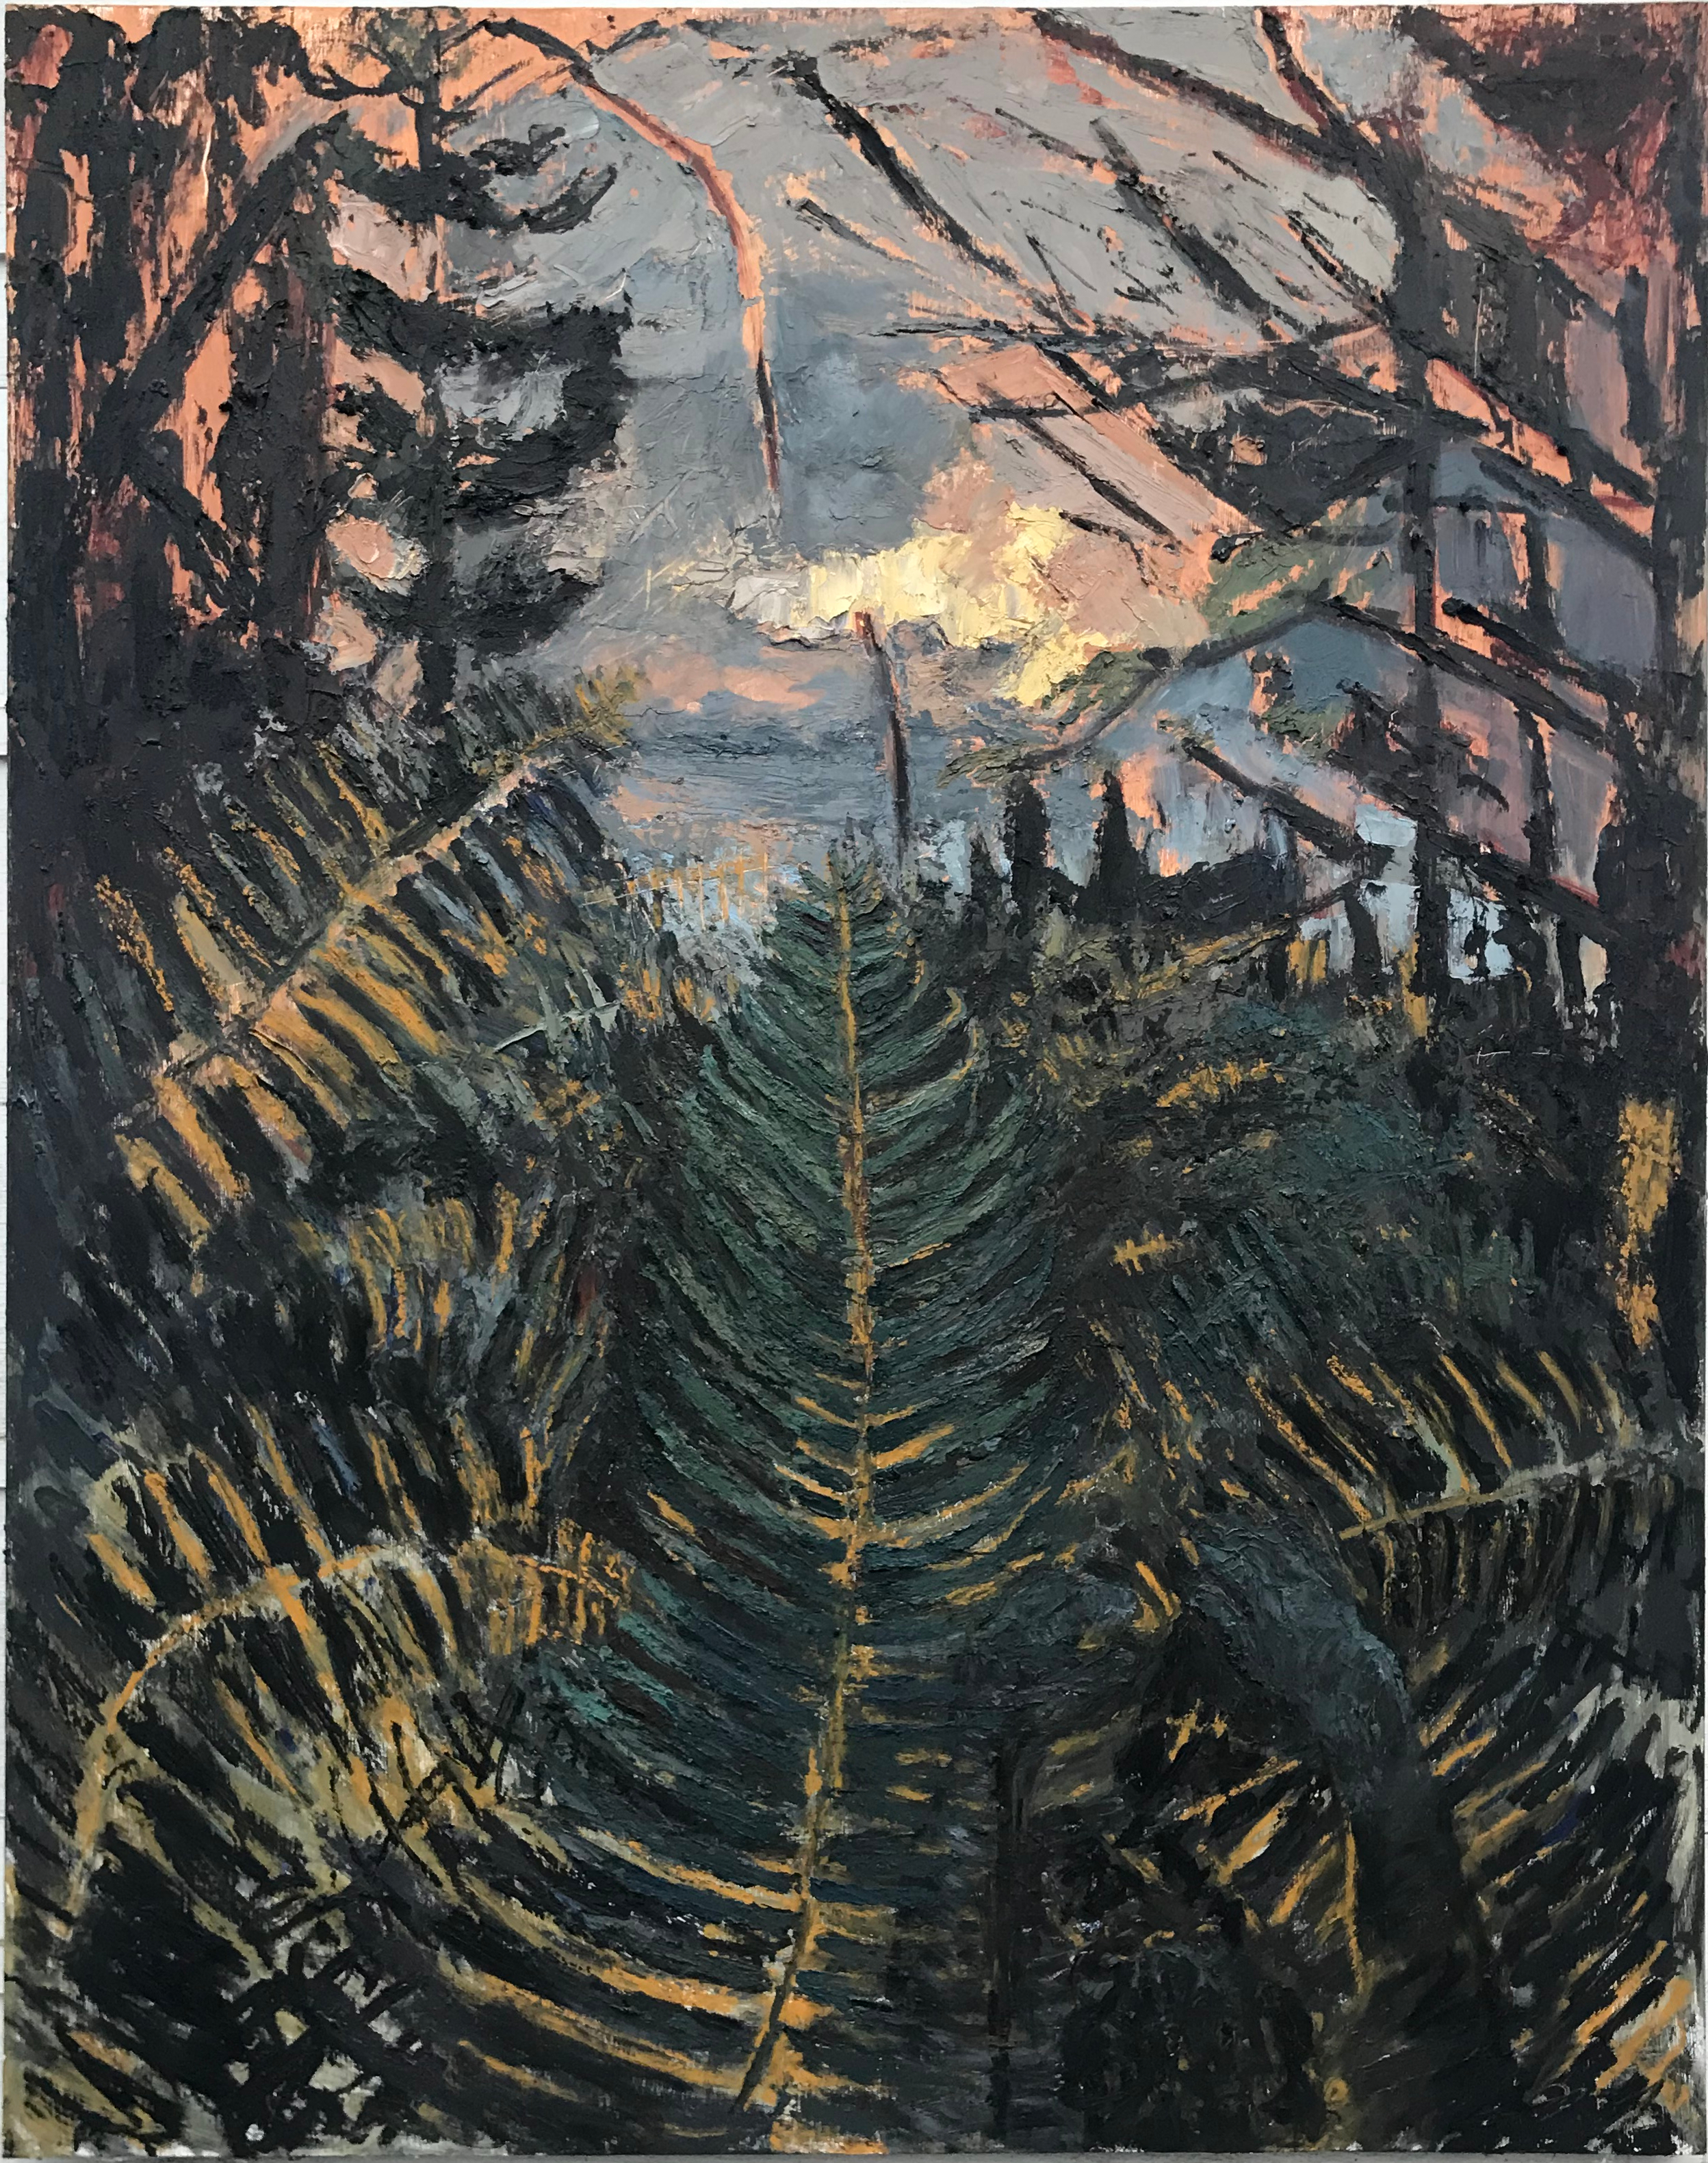 Ferns at Dusk (Winter), oil on panel, 60.75 x 48 in., 2018